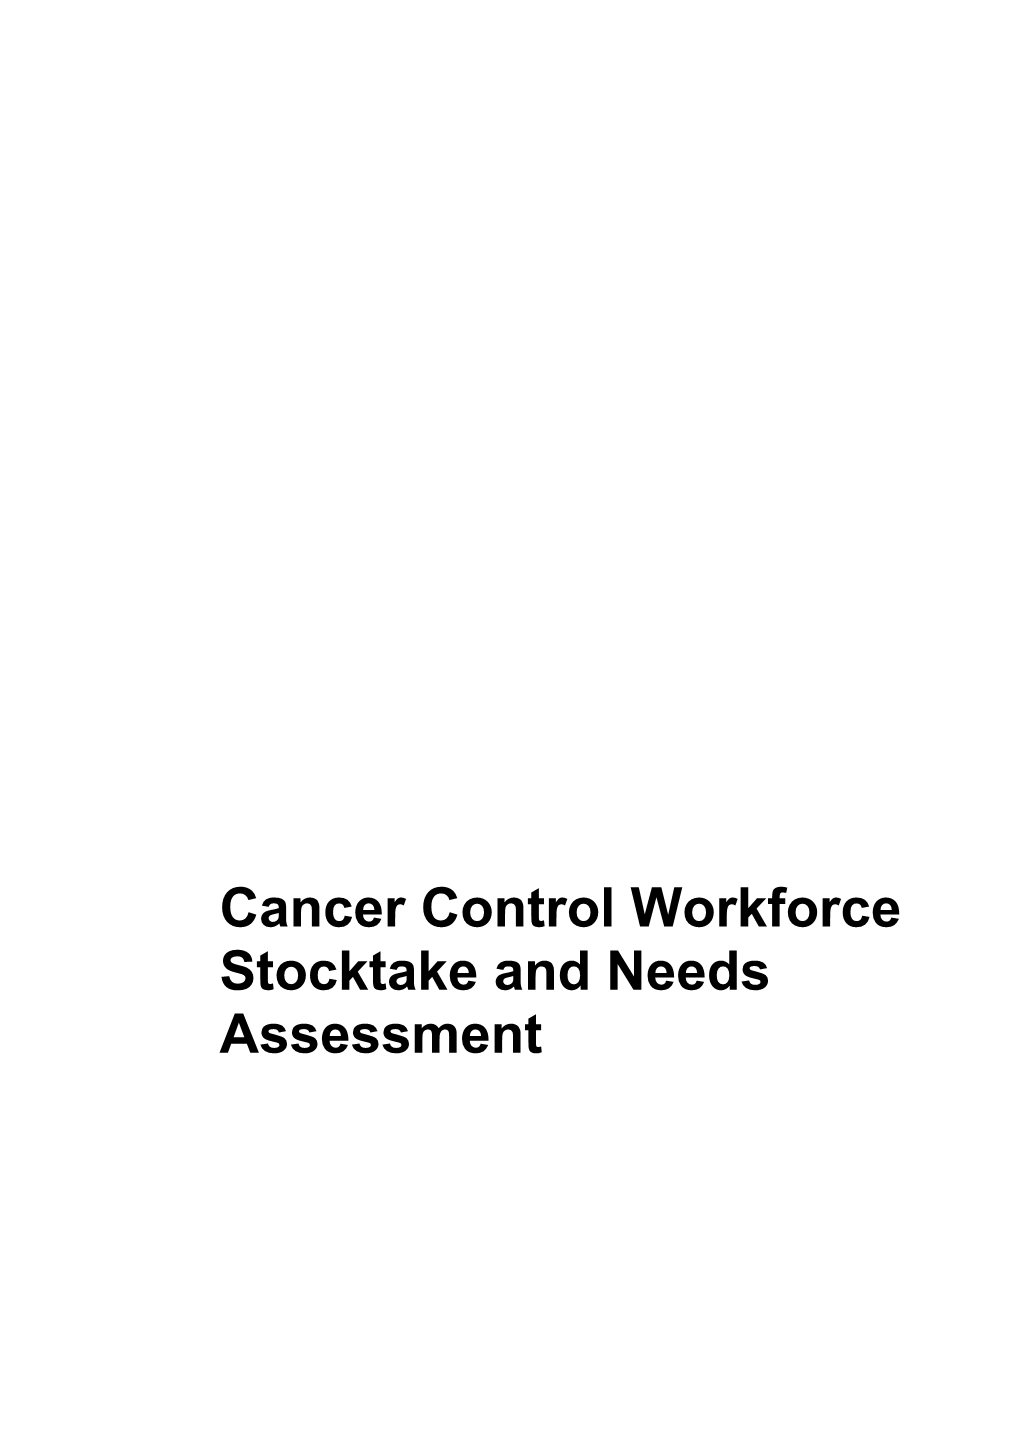 Cancer Control Workforce Stocktake and Needs Assessment